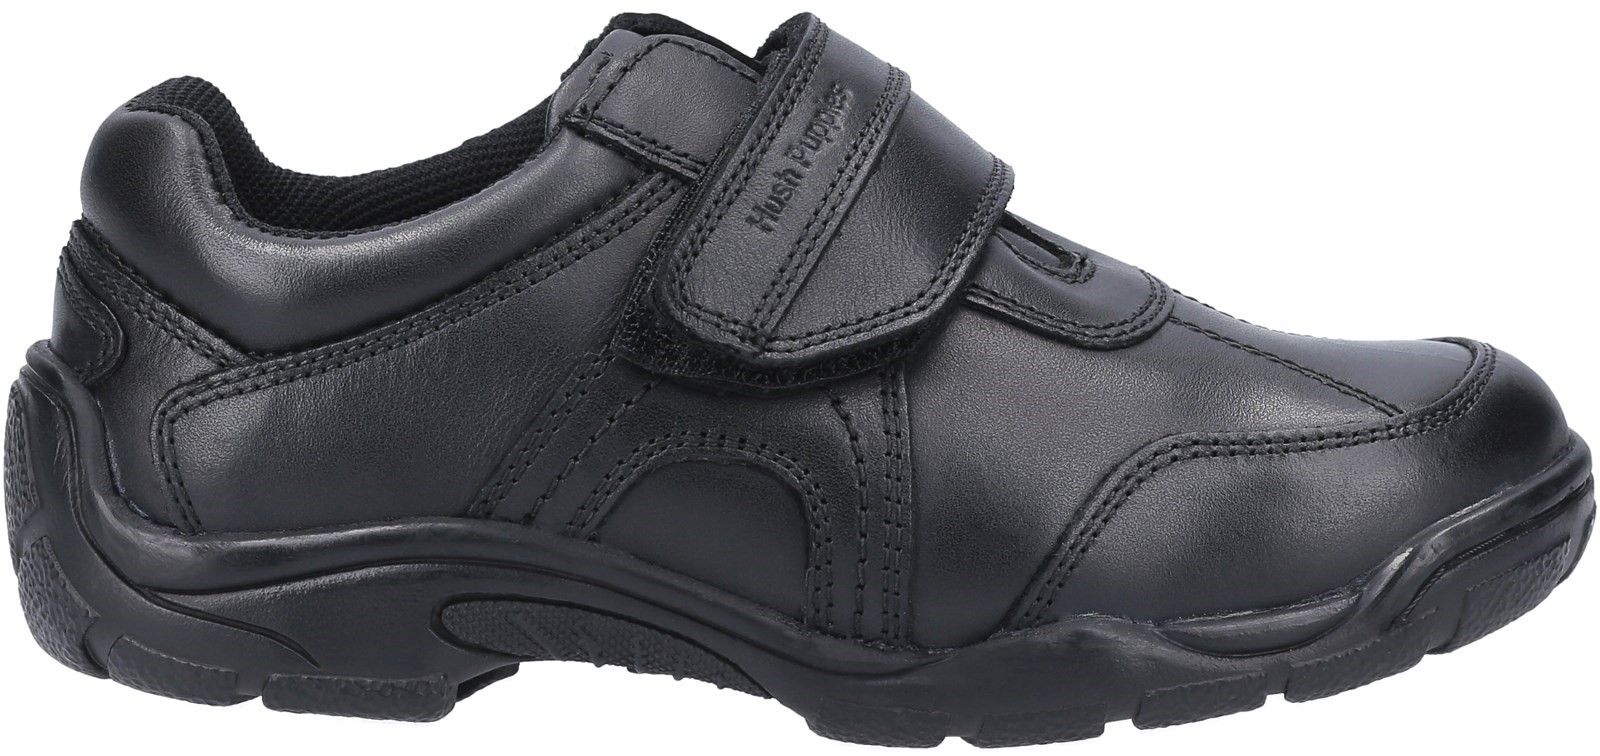 Classic single fit Boys Back to School Shoe from Hush Puppies - Arlo has a leather upper and touch-fastening strap for ease and adjustable fit. It features a padded collar and a memory foam sock for all day comfort. It also has a Micro-Fresh sock and lining.Leather Upper. 
Memory Foam Insole. 
Micro-Fresh Lining.